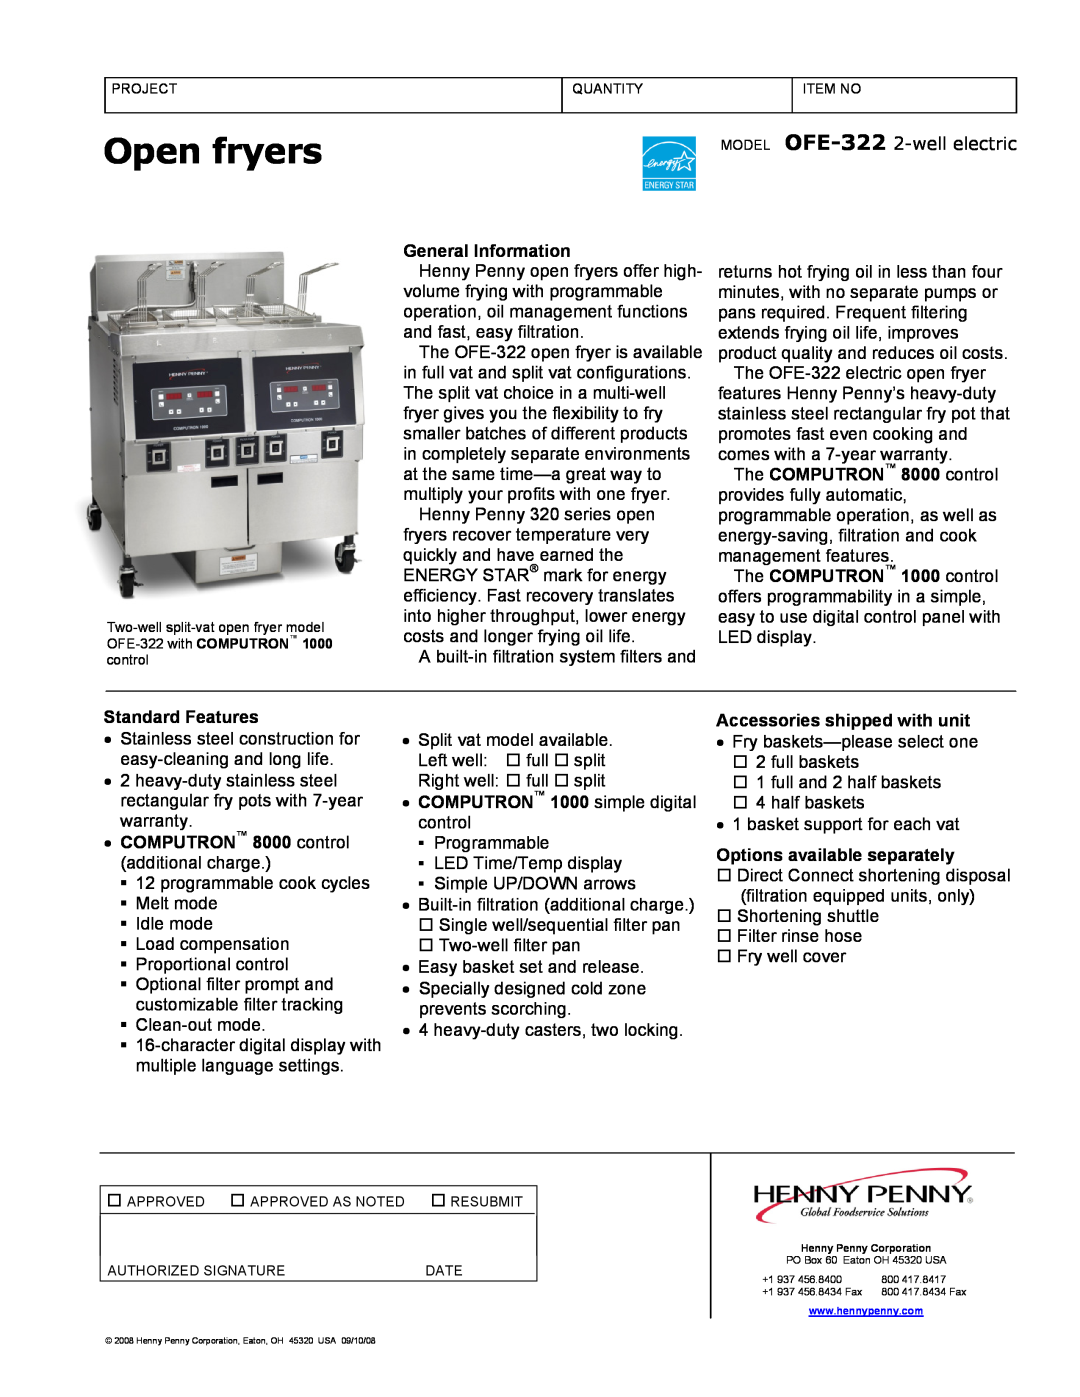 Henny Penny OFE-322 warranty Open fryers, General Information, Standard Features, COMPUTRON 8000 control additional charge 